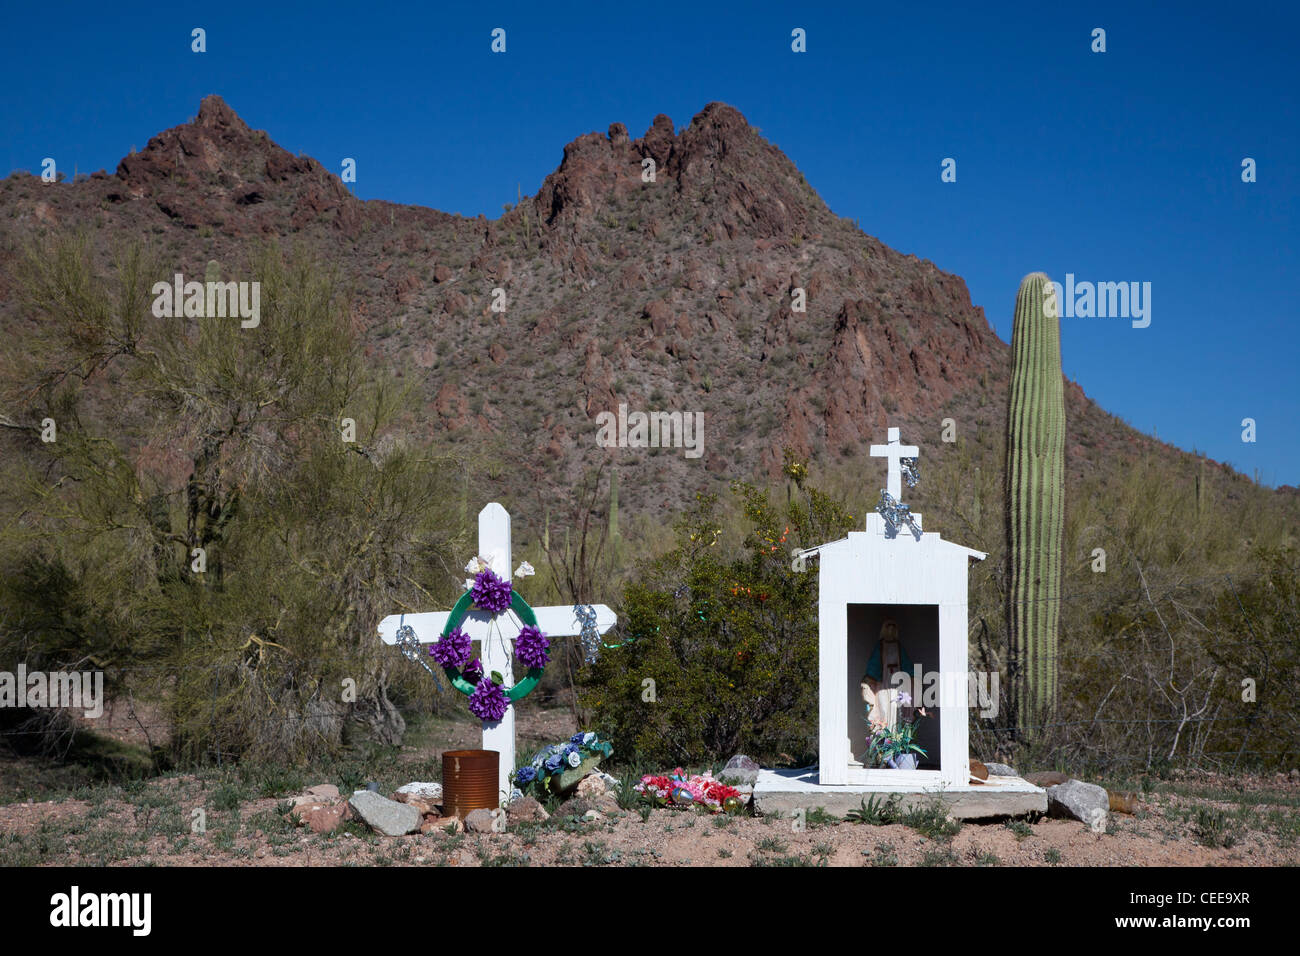 A shrine at the side of a road on the Tohono O'odham Indian Reservation. Stock Photo